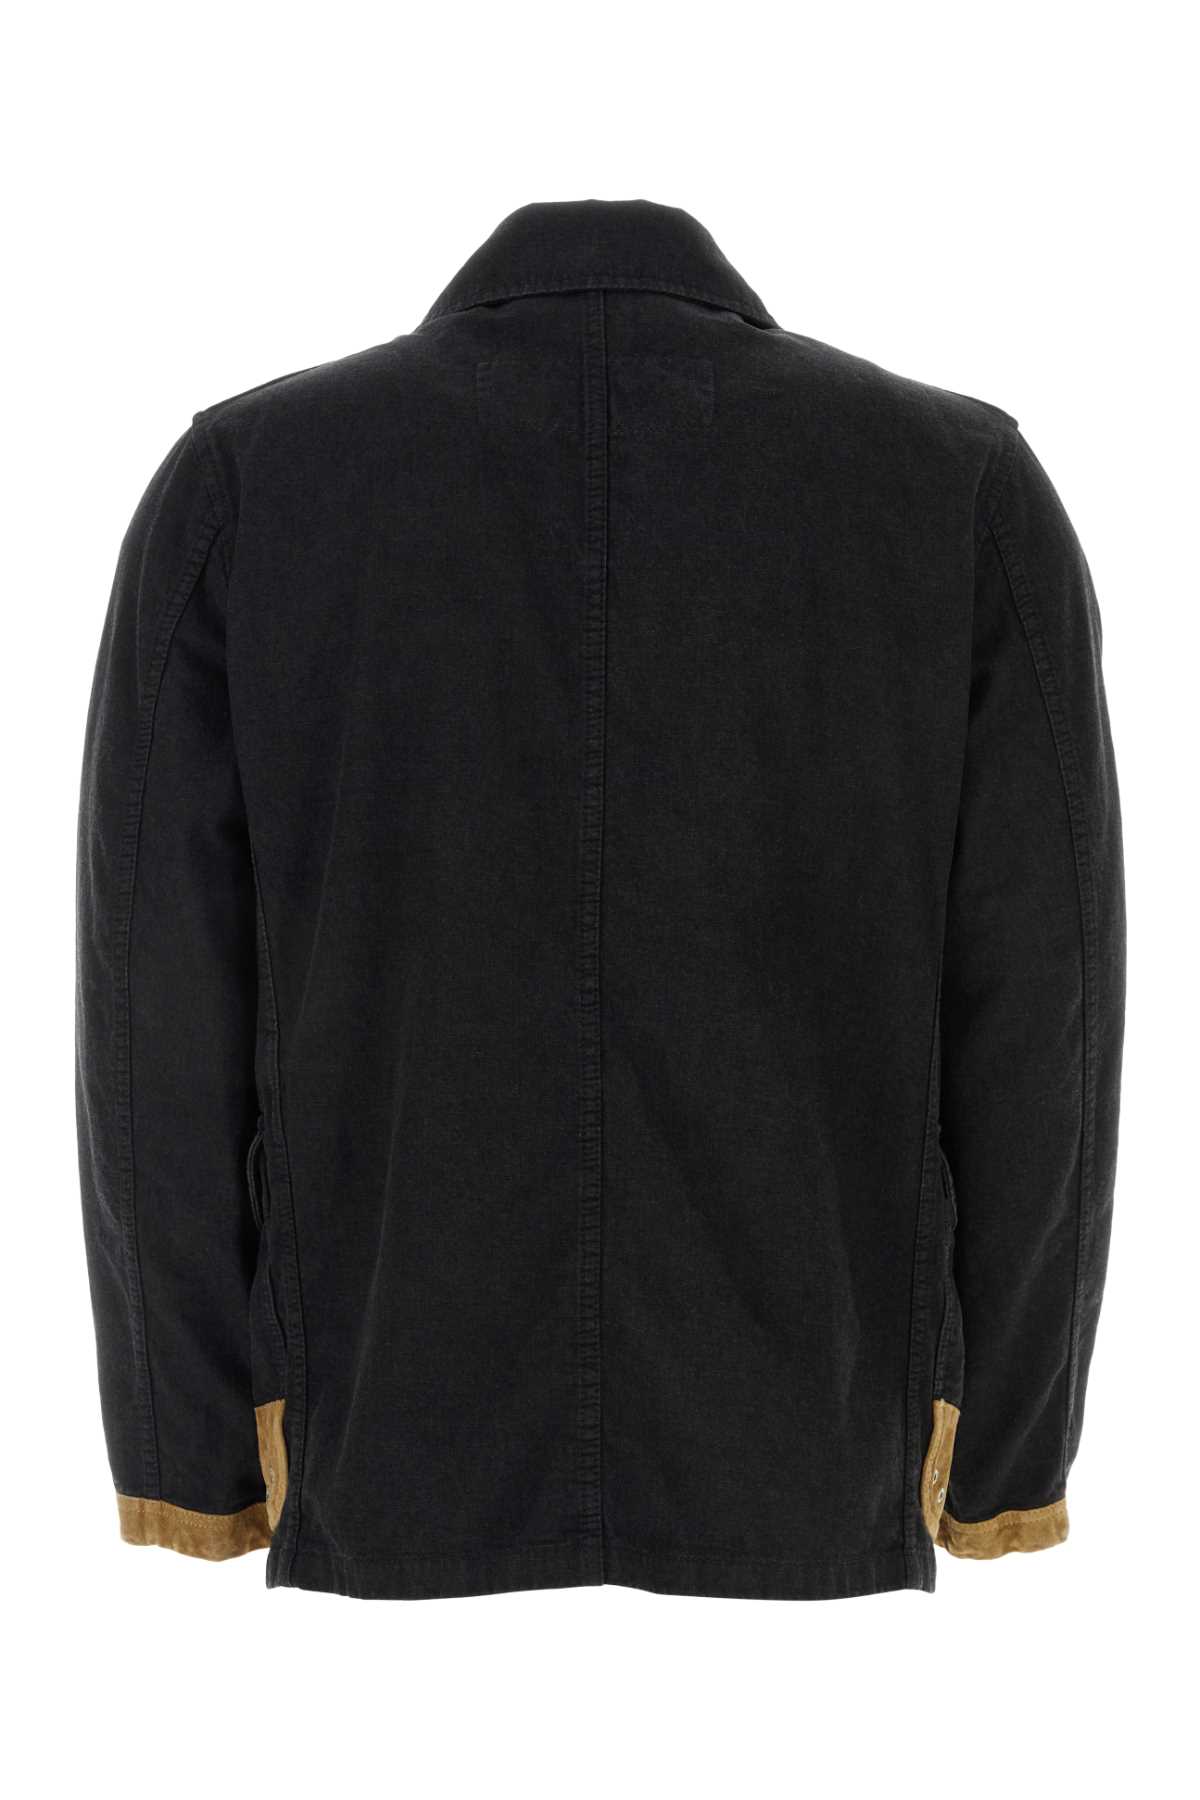 Fay Black Cotton Jacket In Blunottescuro